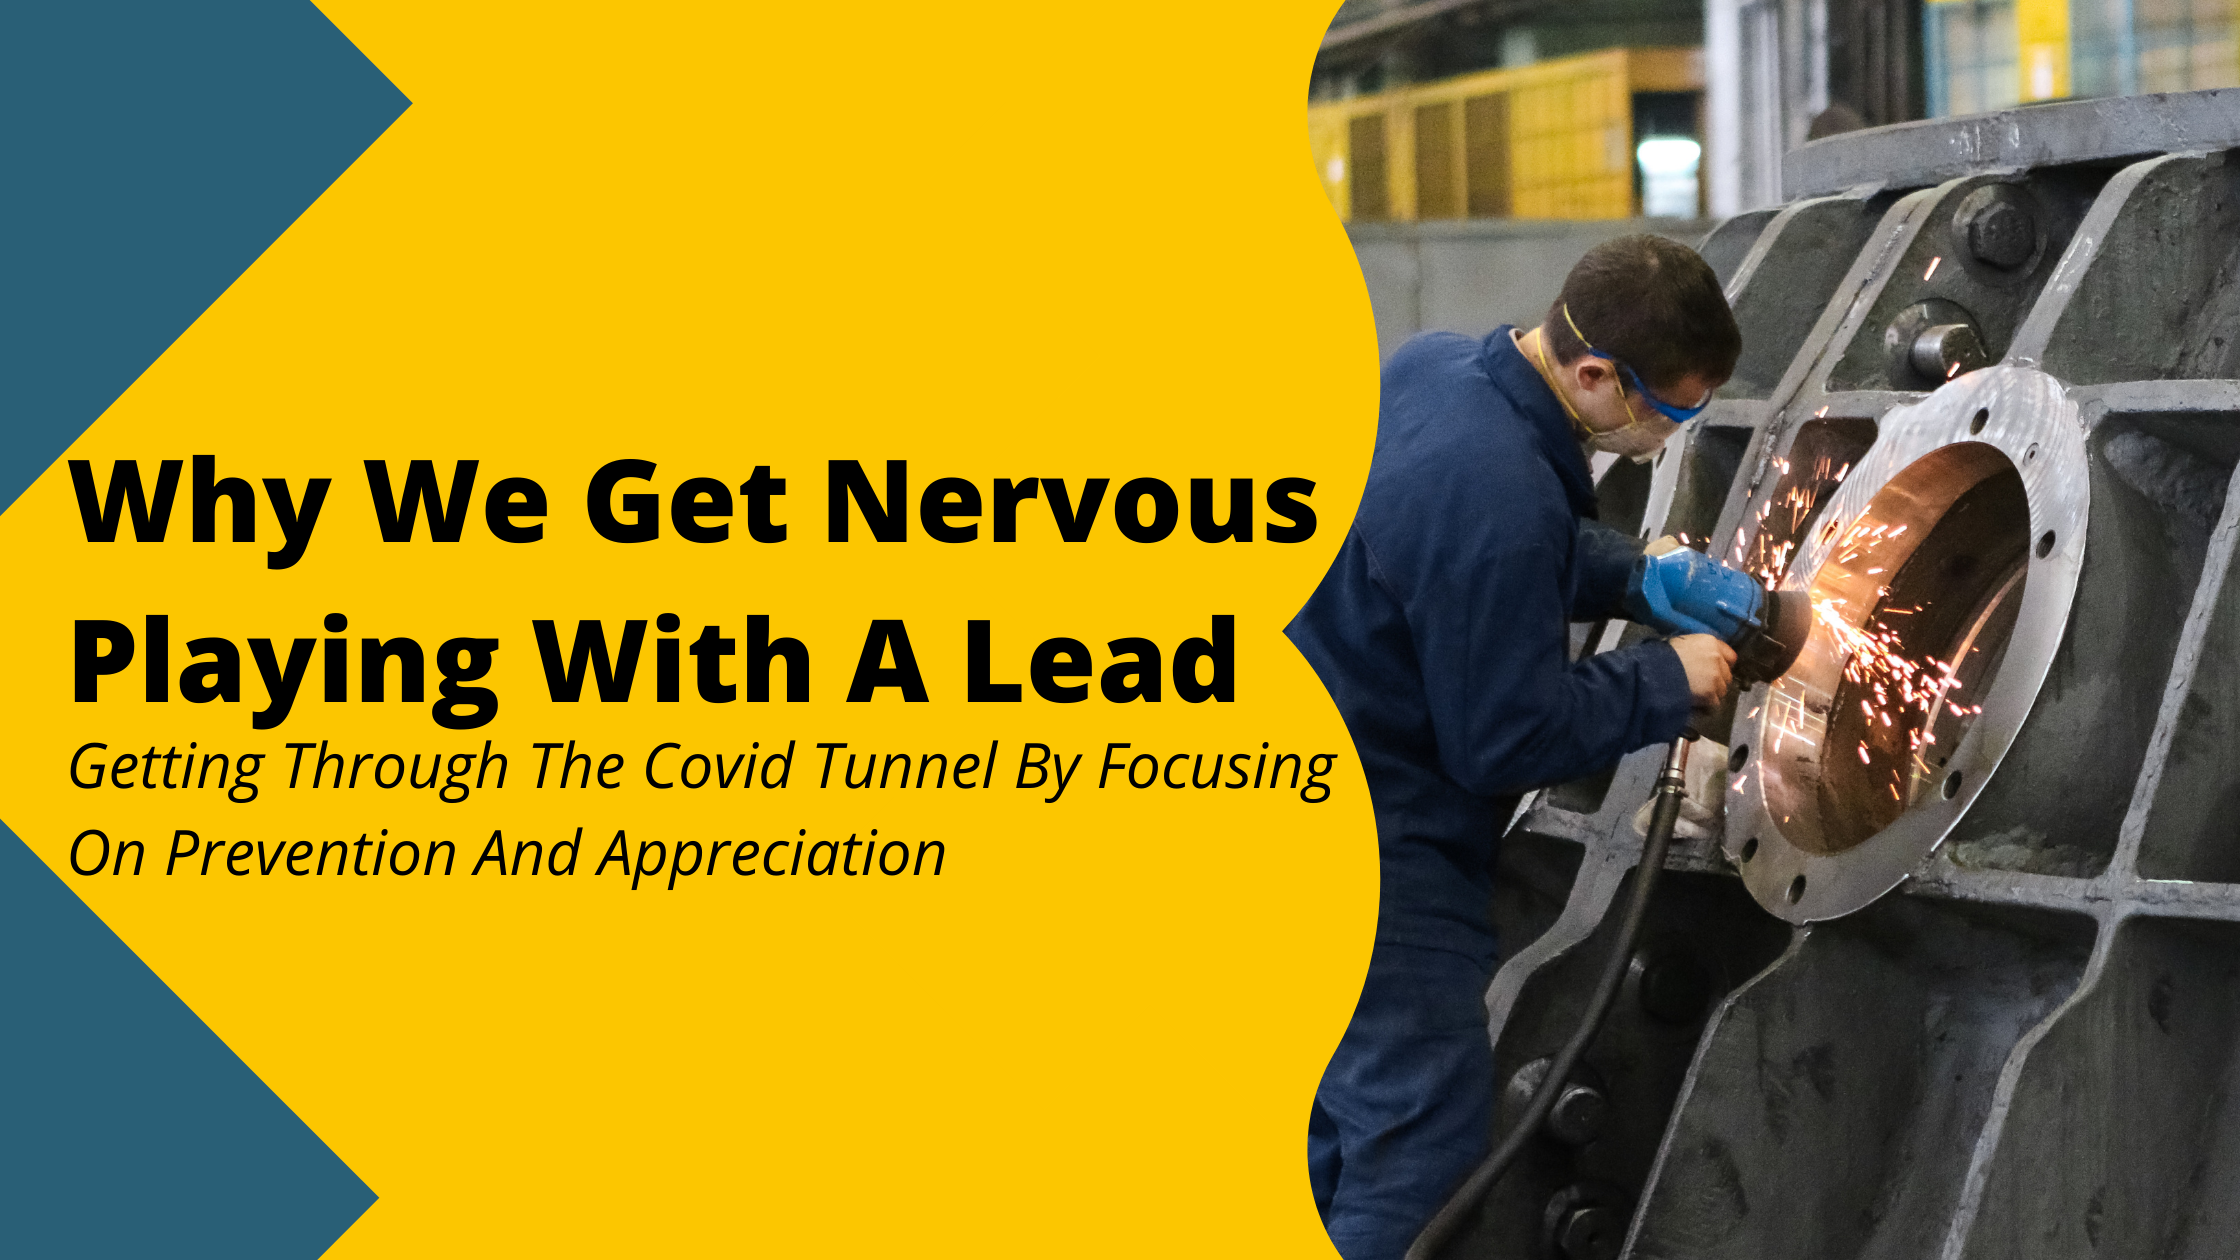 Why We Get Nervous Playing With A Lead